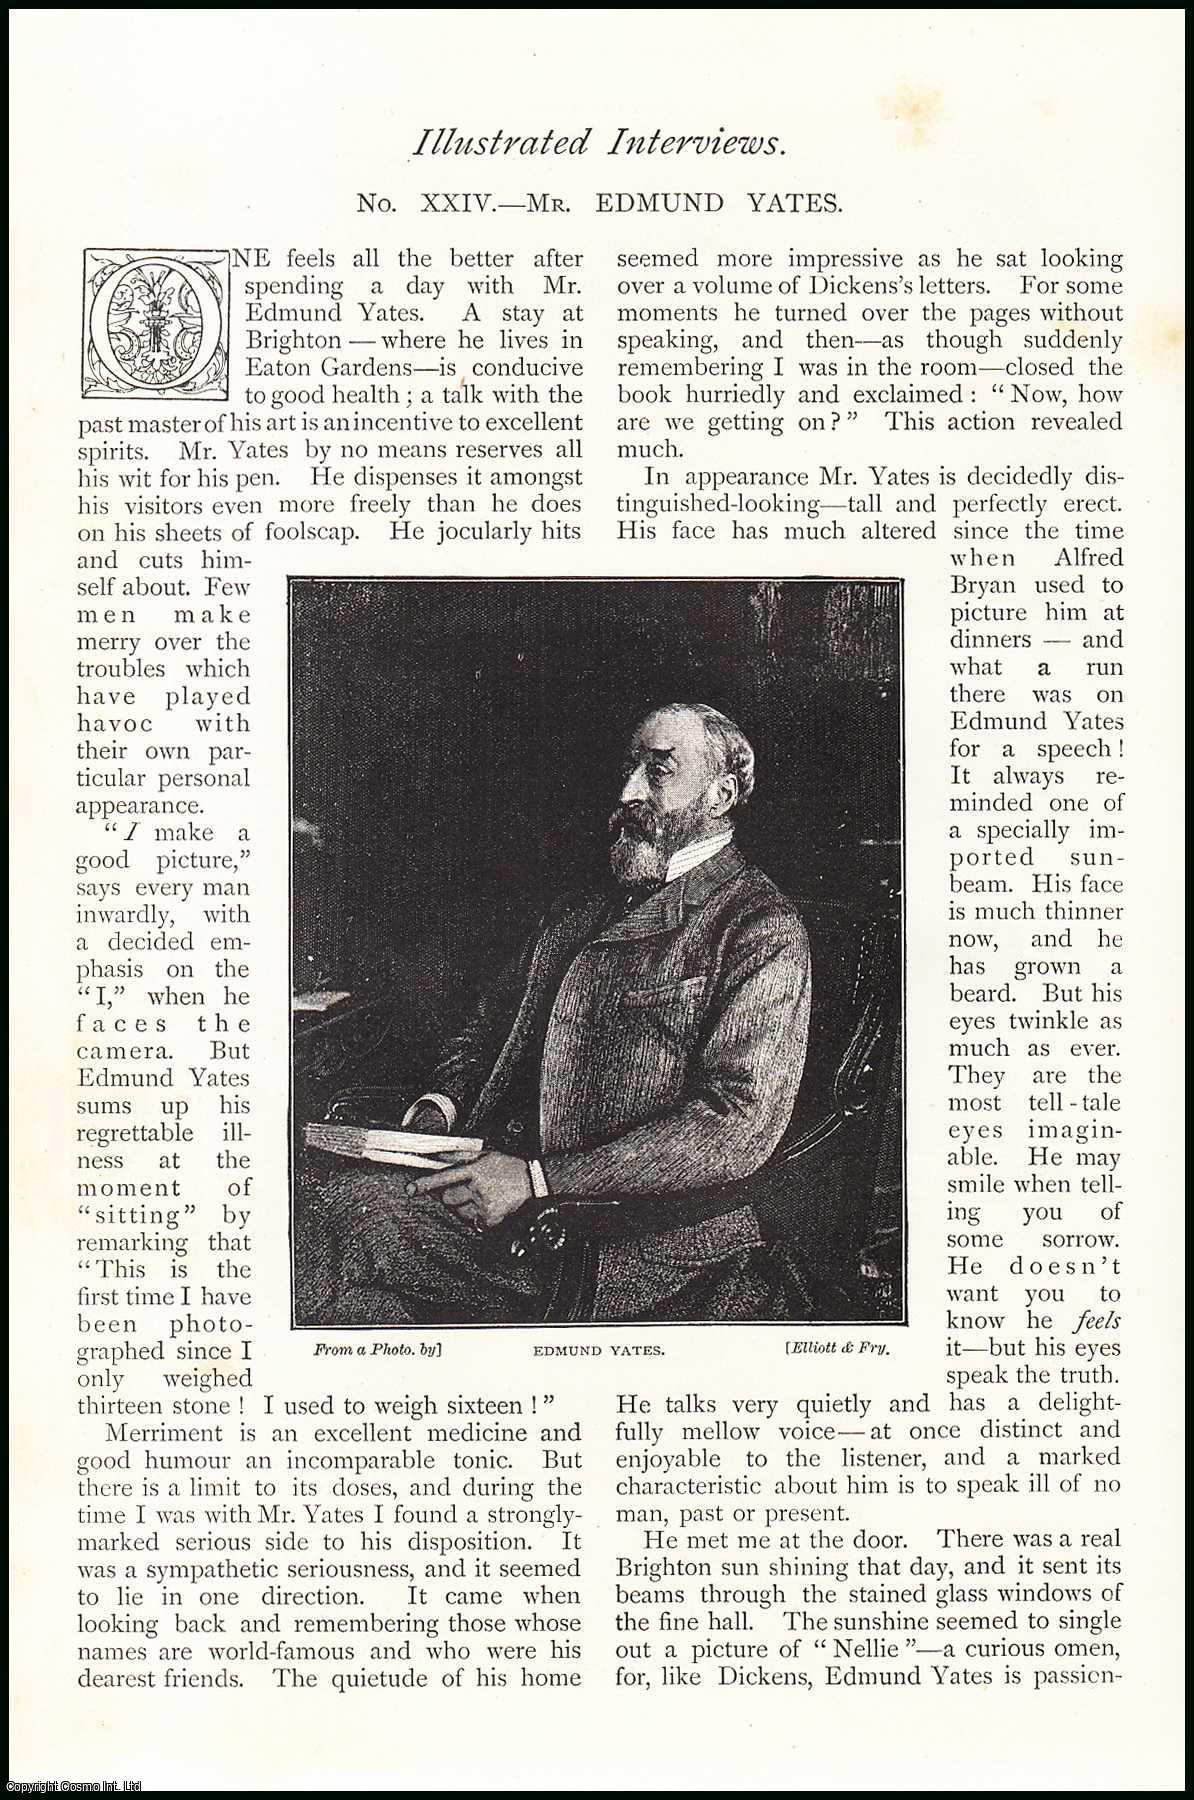 Harry How - Mr Edmund Yates, artist. Illustrated Interview. An uncommon original article from The Strand Magazine, 1893.